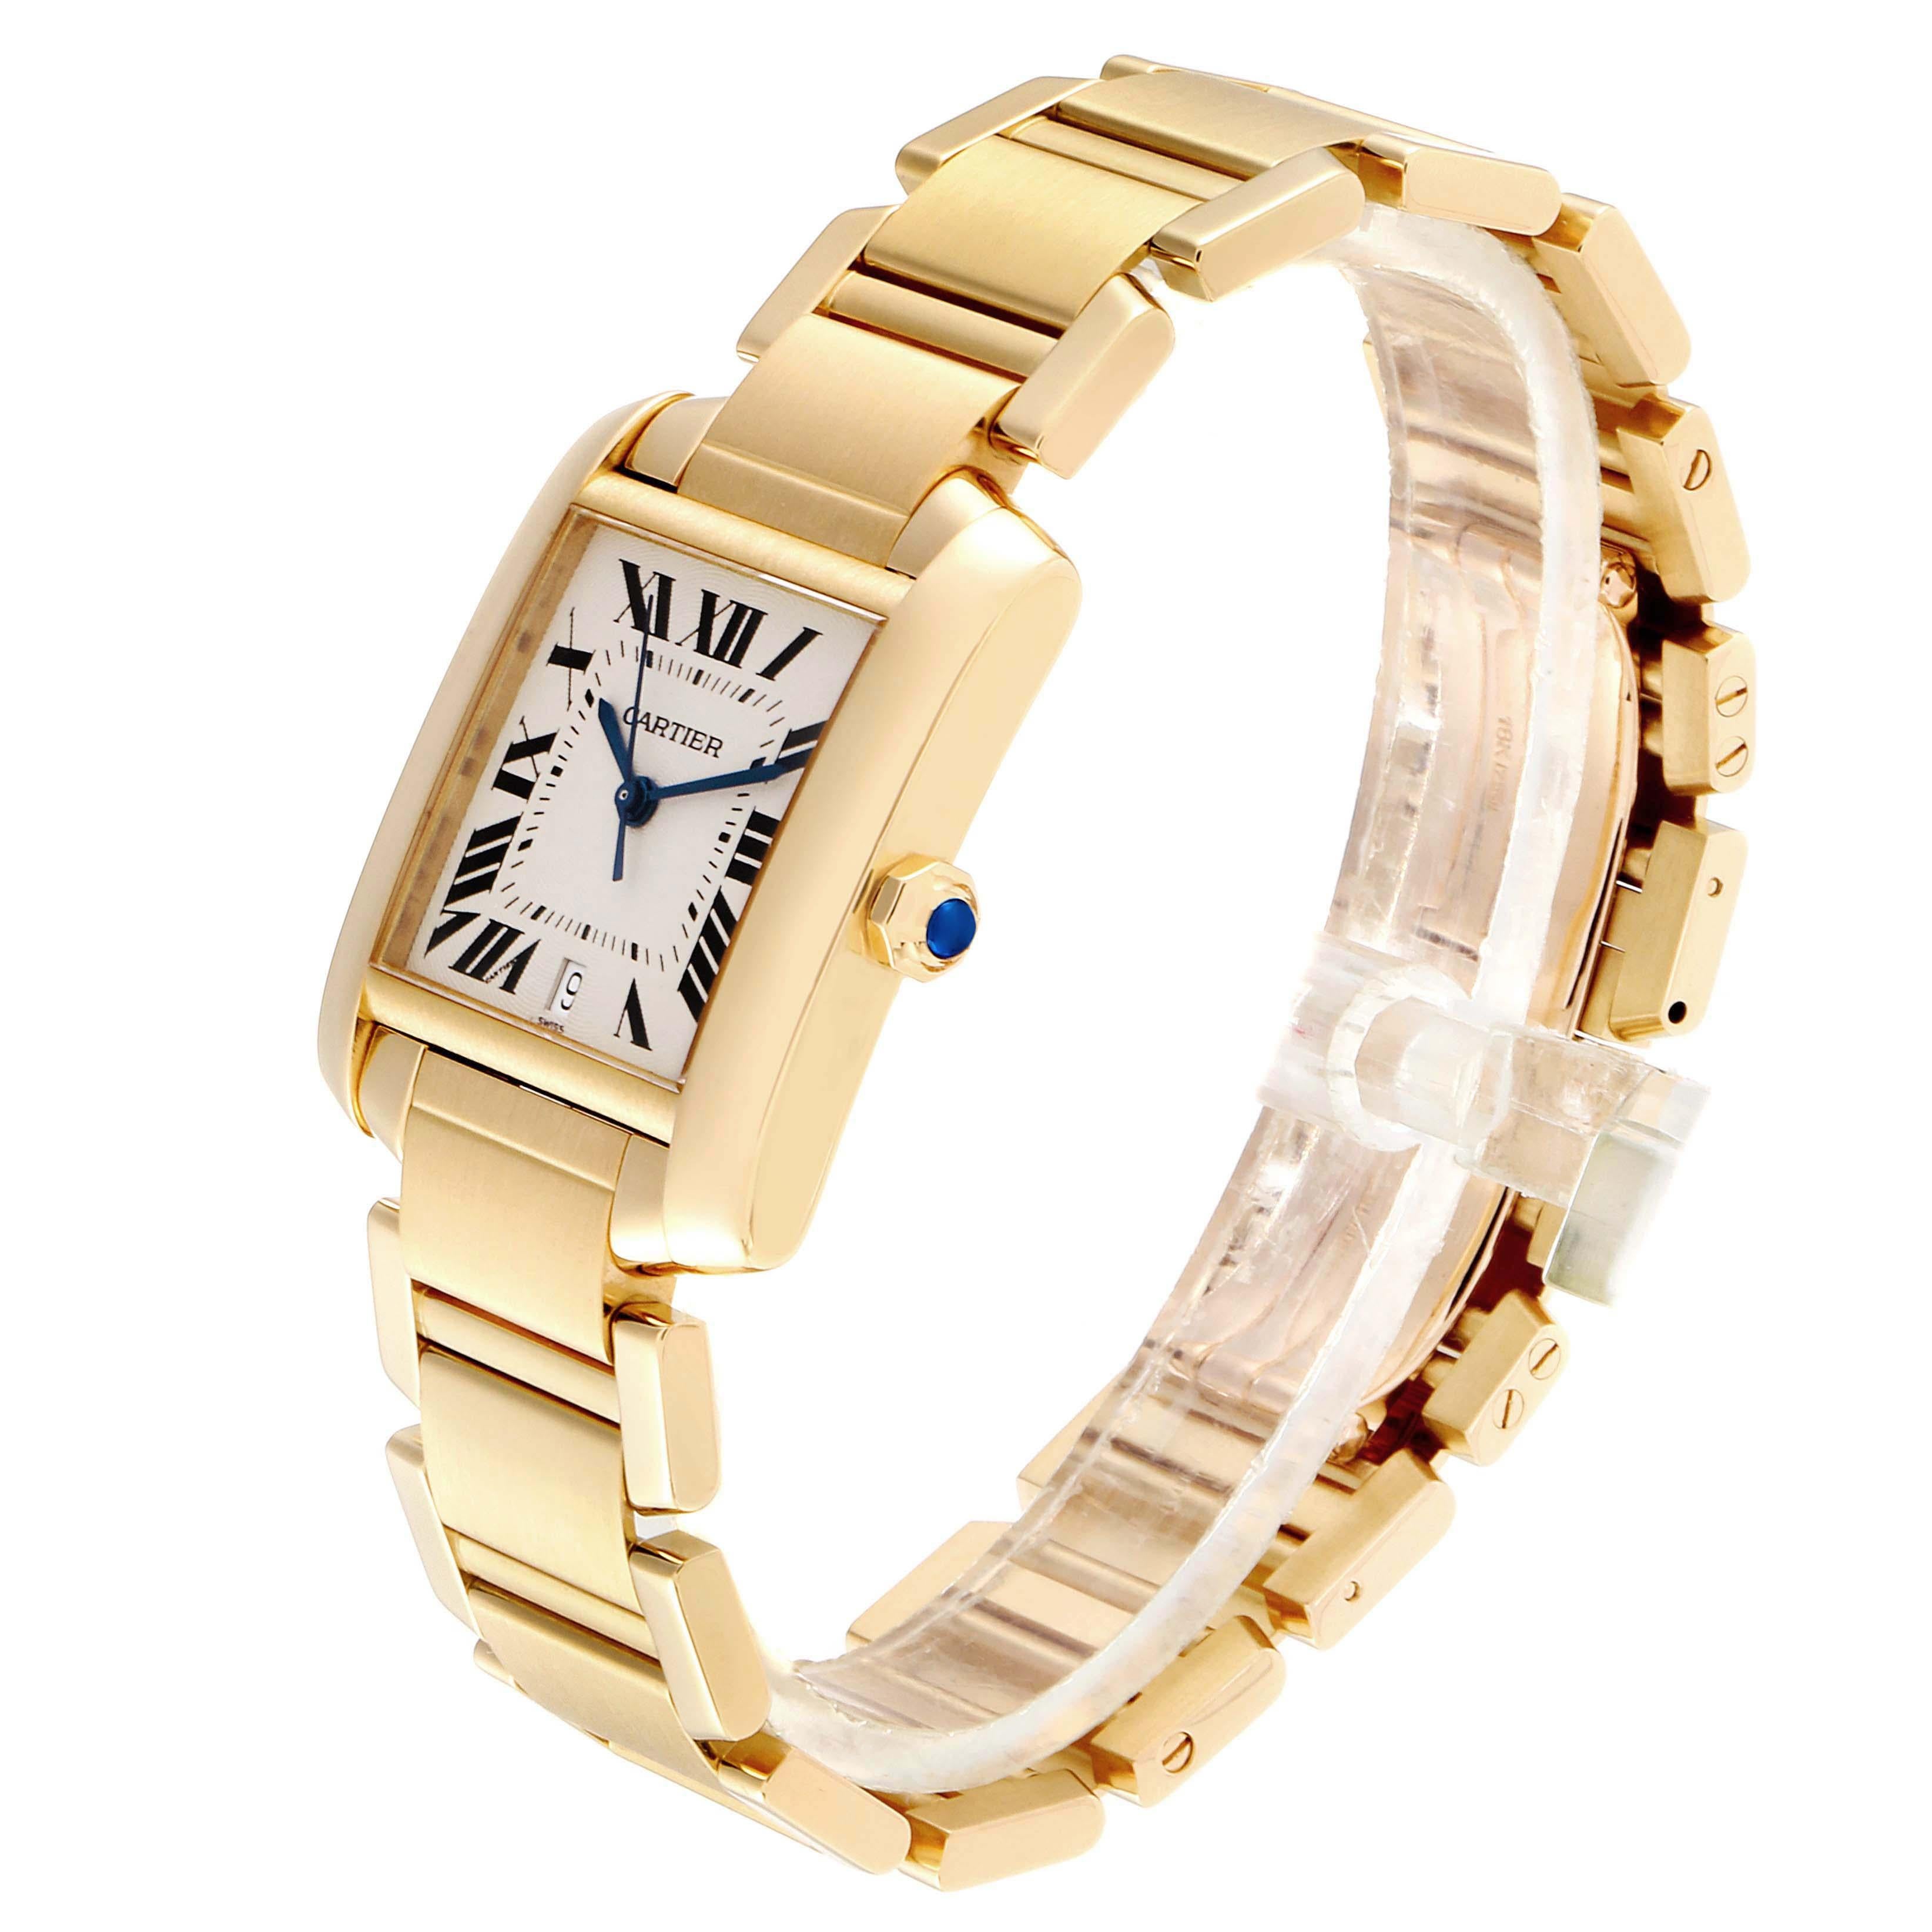 Cartier Tank Francaise Large Yellow Gold Automatic Men's Watch W50001R2 In Excellent Condition For Sale In Atlanta, GA